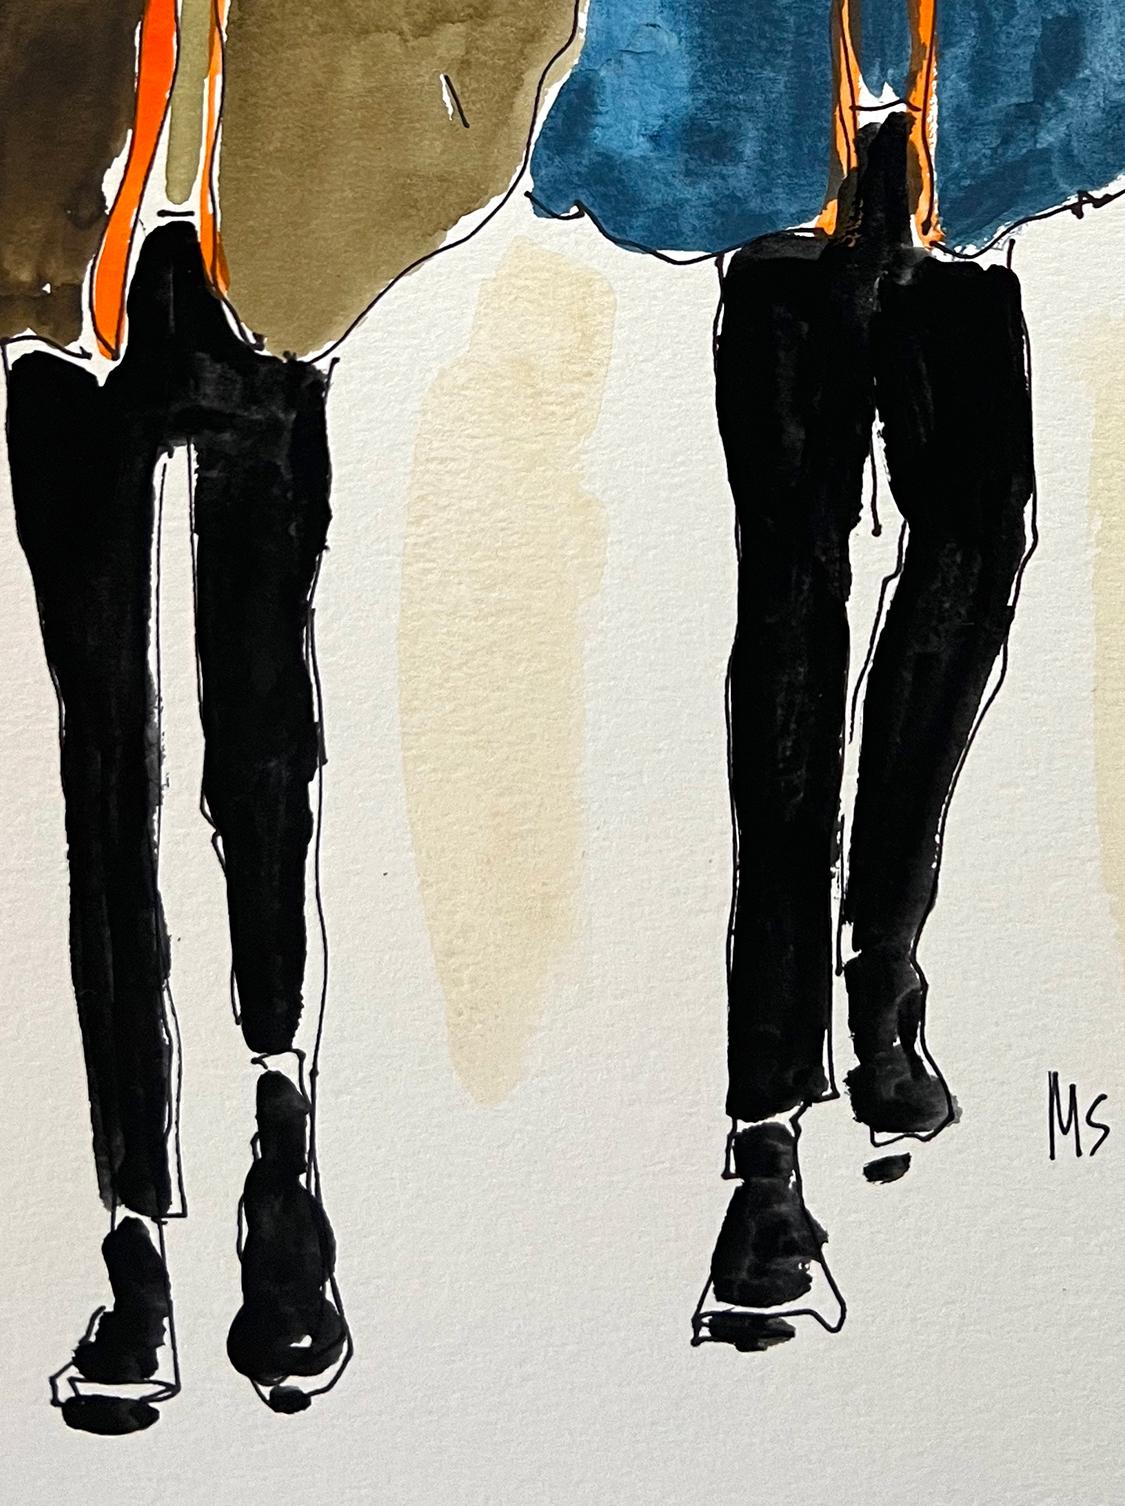 Prada puffy coats. Watercolor fashion drawing on archival paper - Contemporary Art by Manuel Santelices